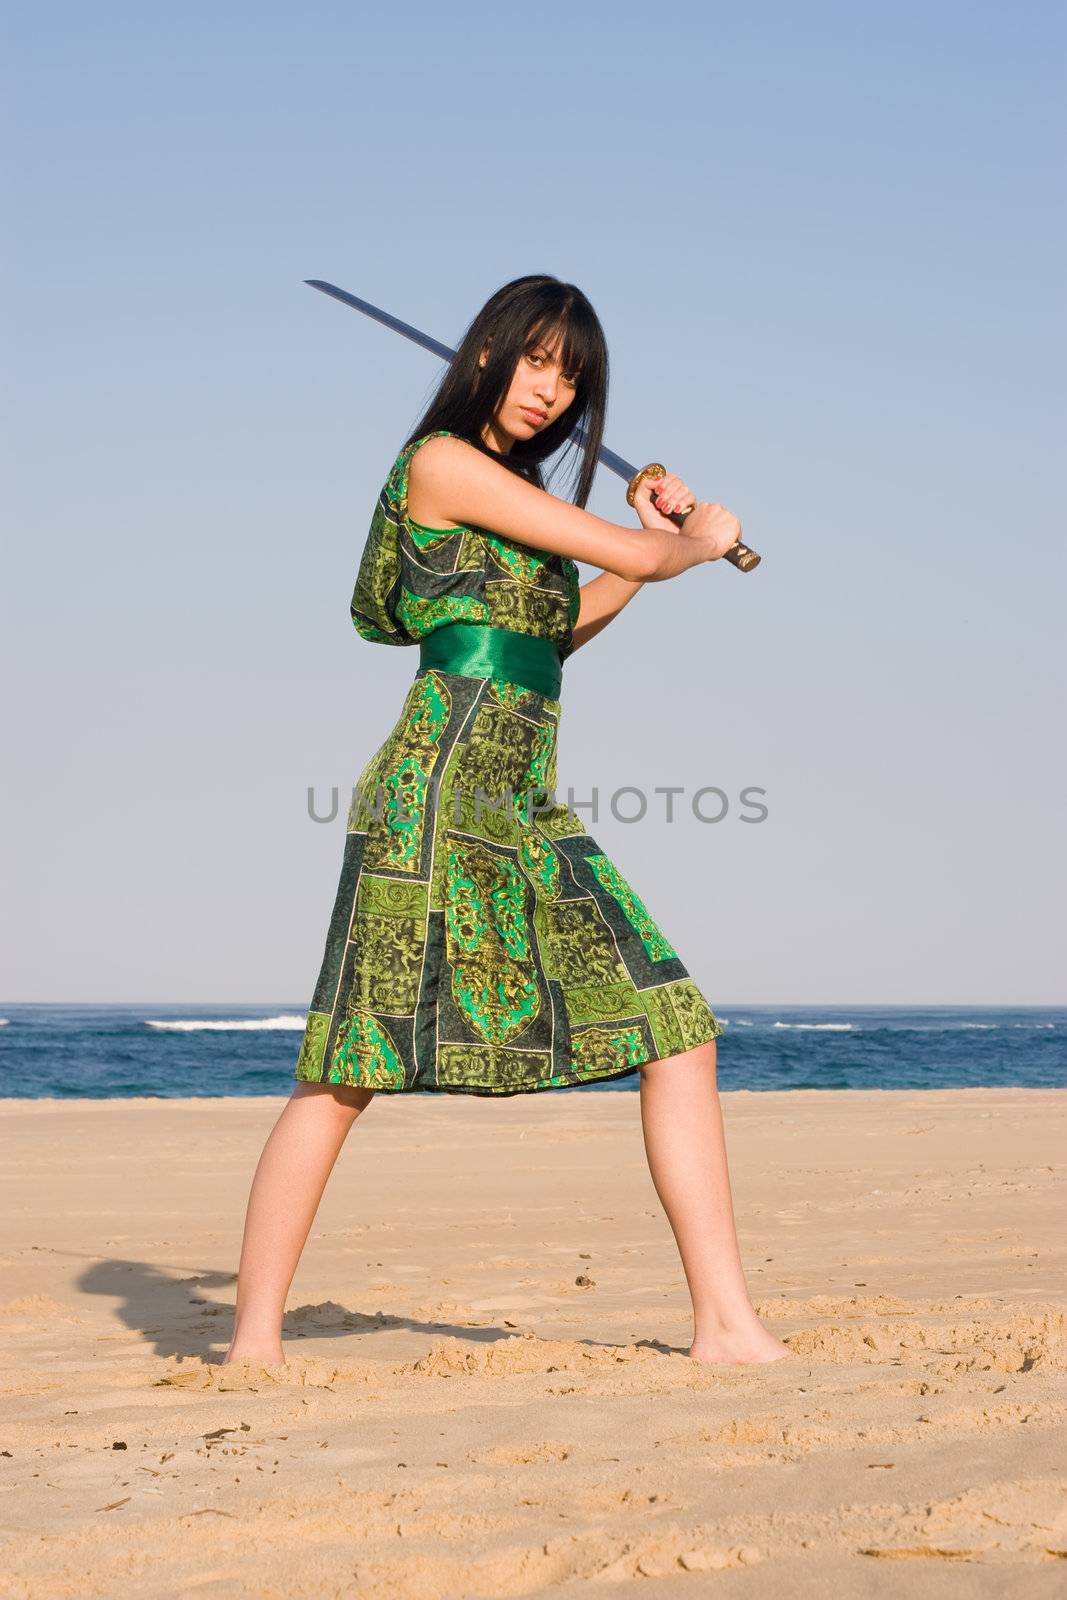 Ethnic Model posing with a sword at the beach